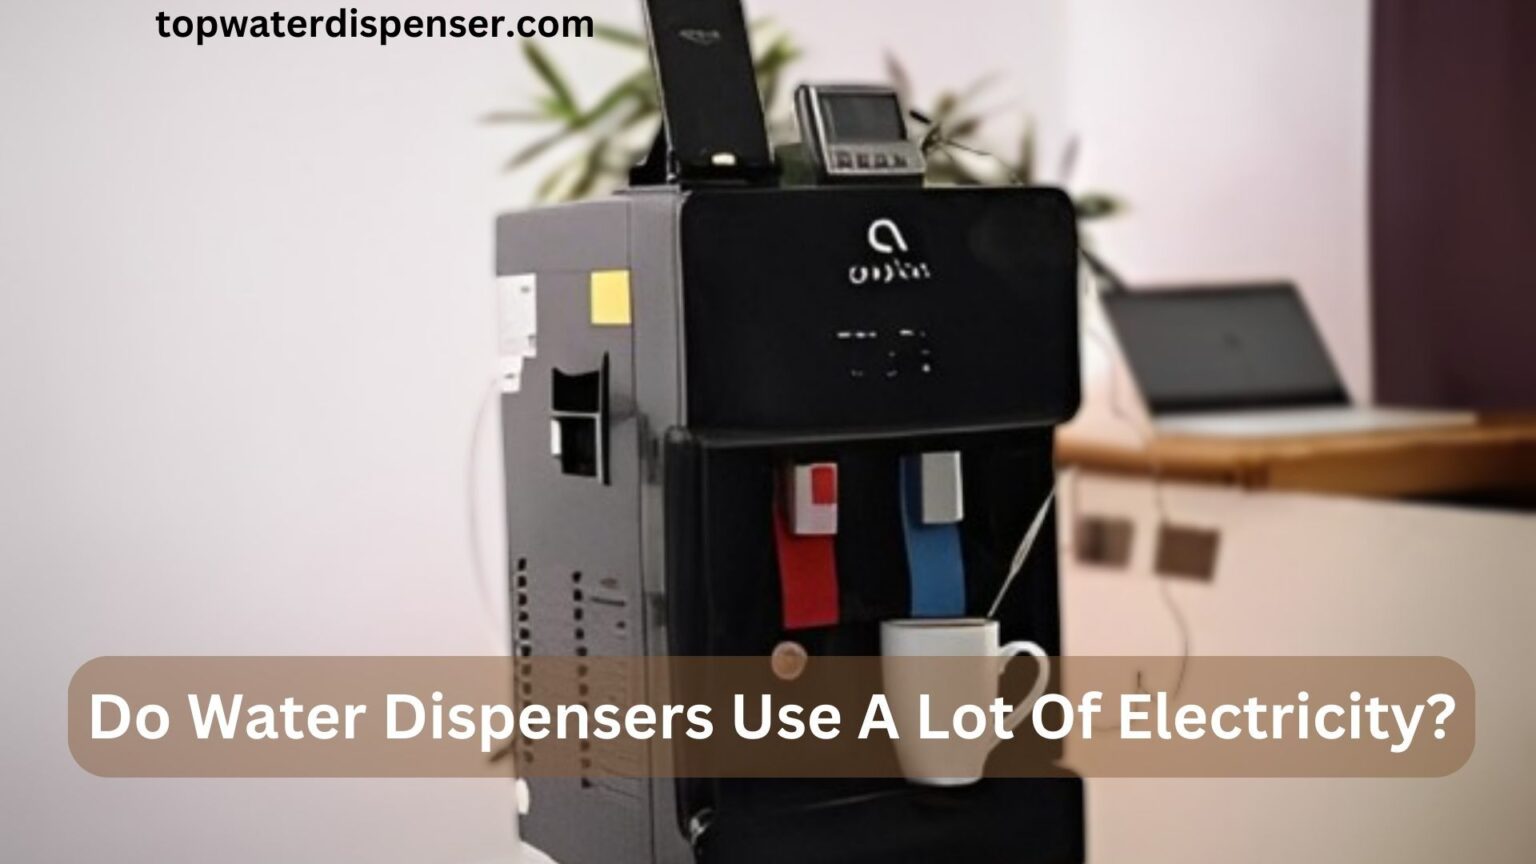 Do Water Dispensers Use A Lot Of Electricity?